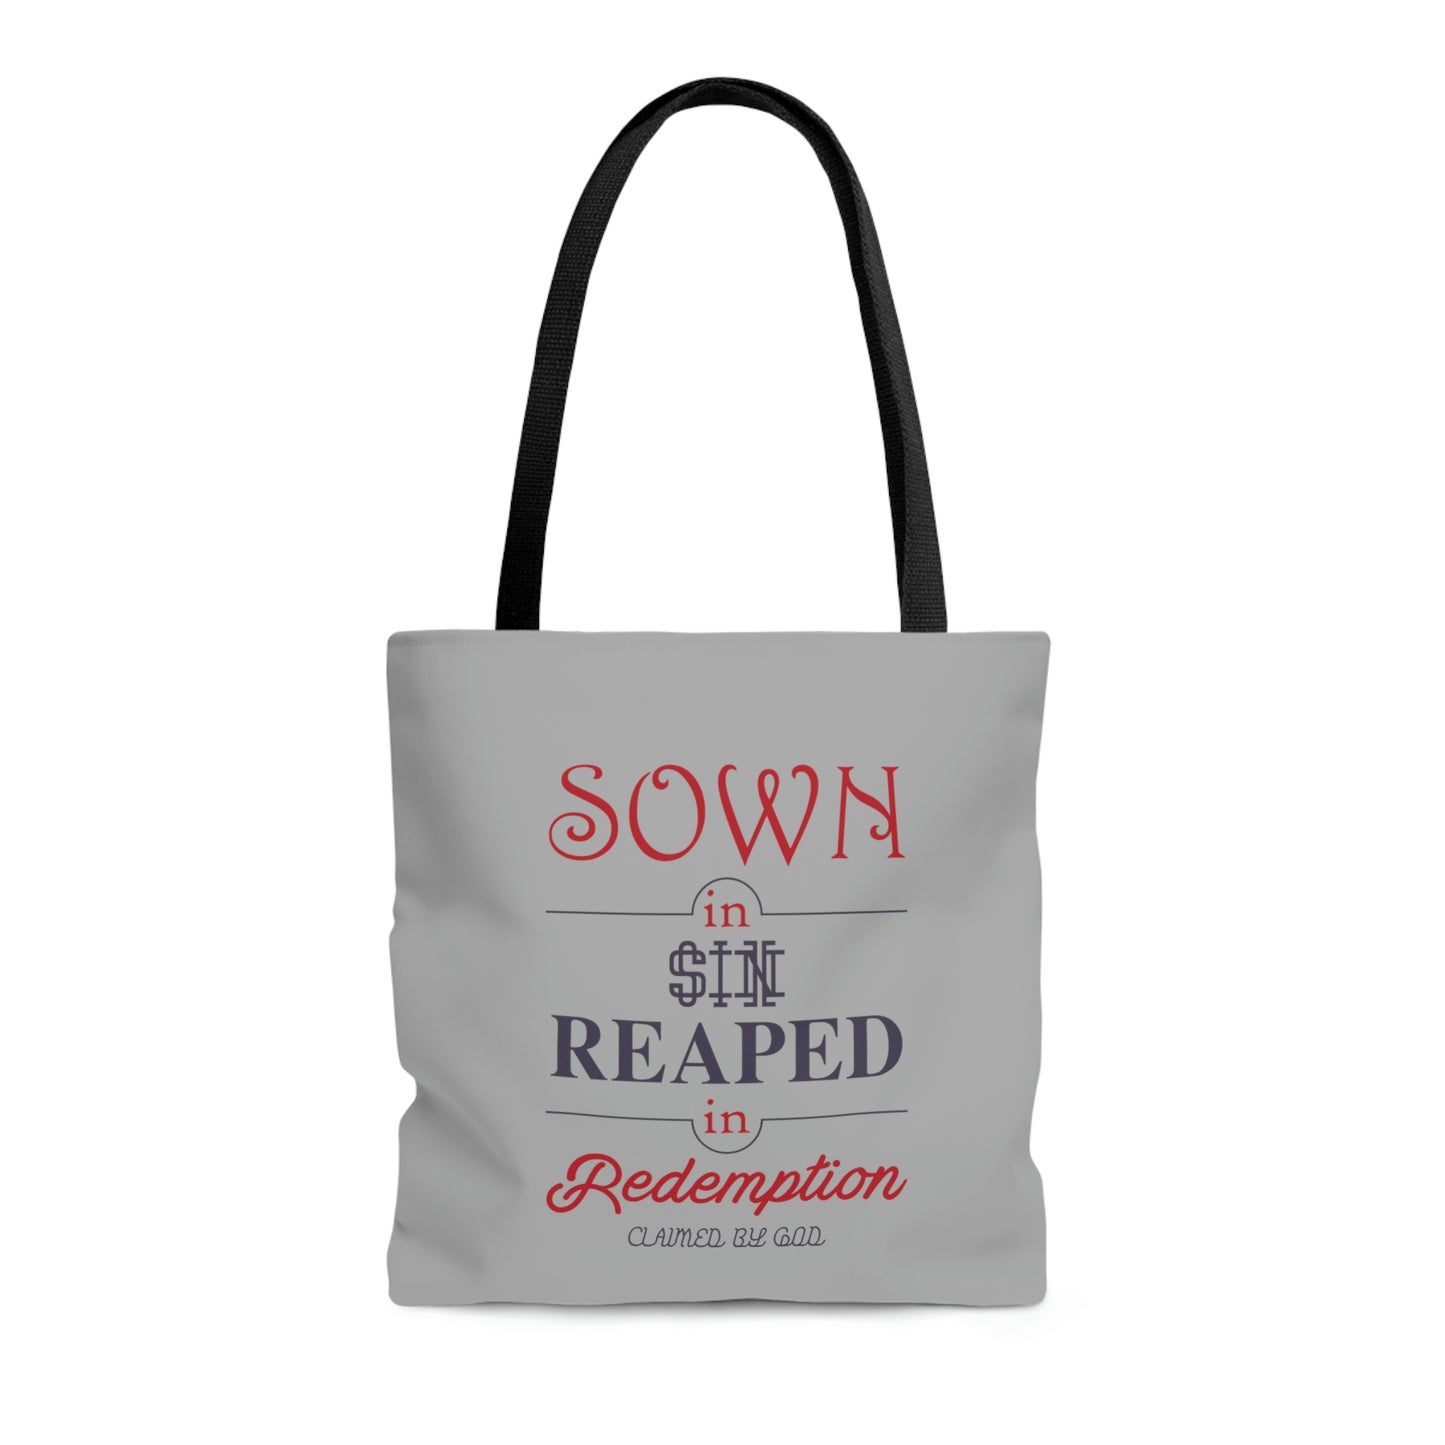 Sown In Sin Reaped In Redemption Tote Bag